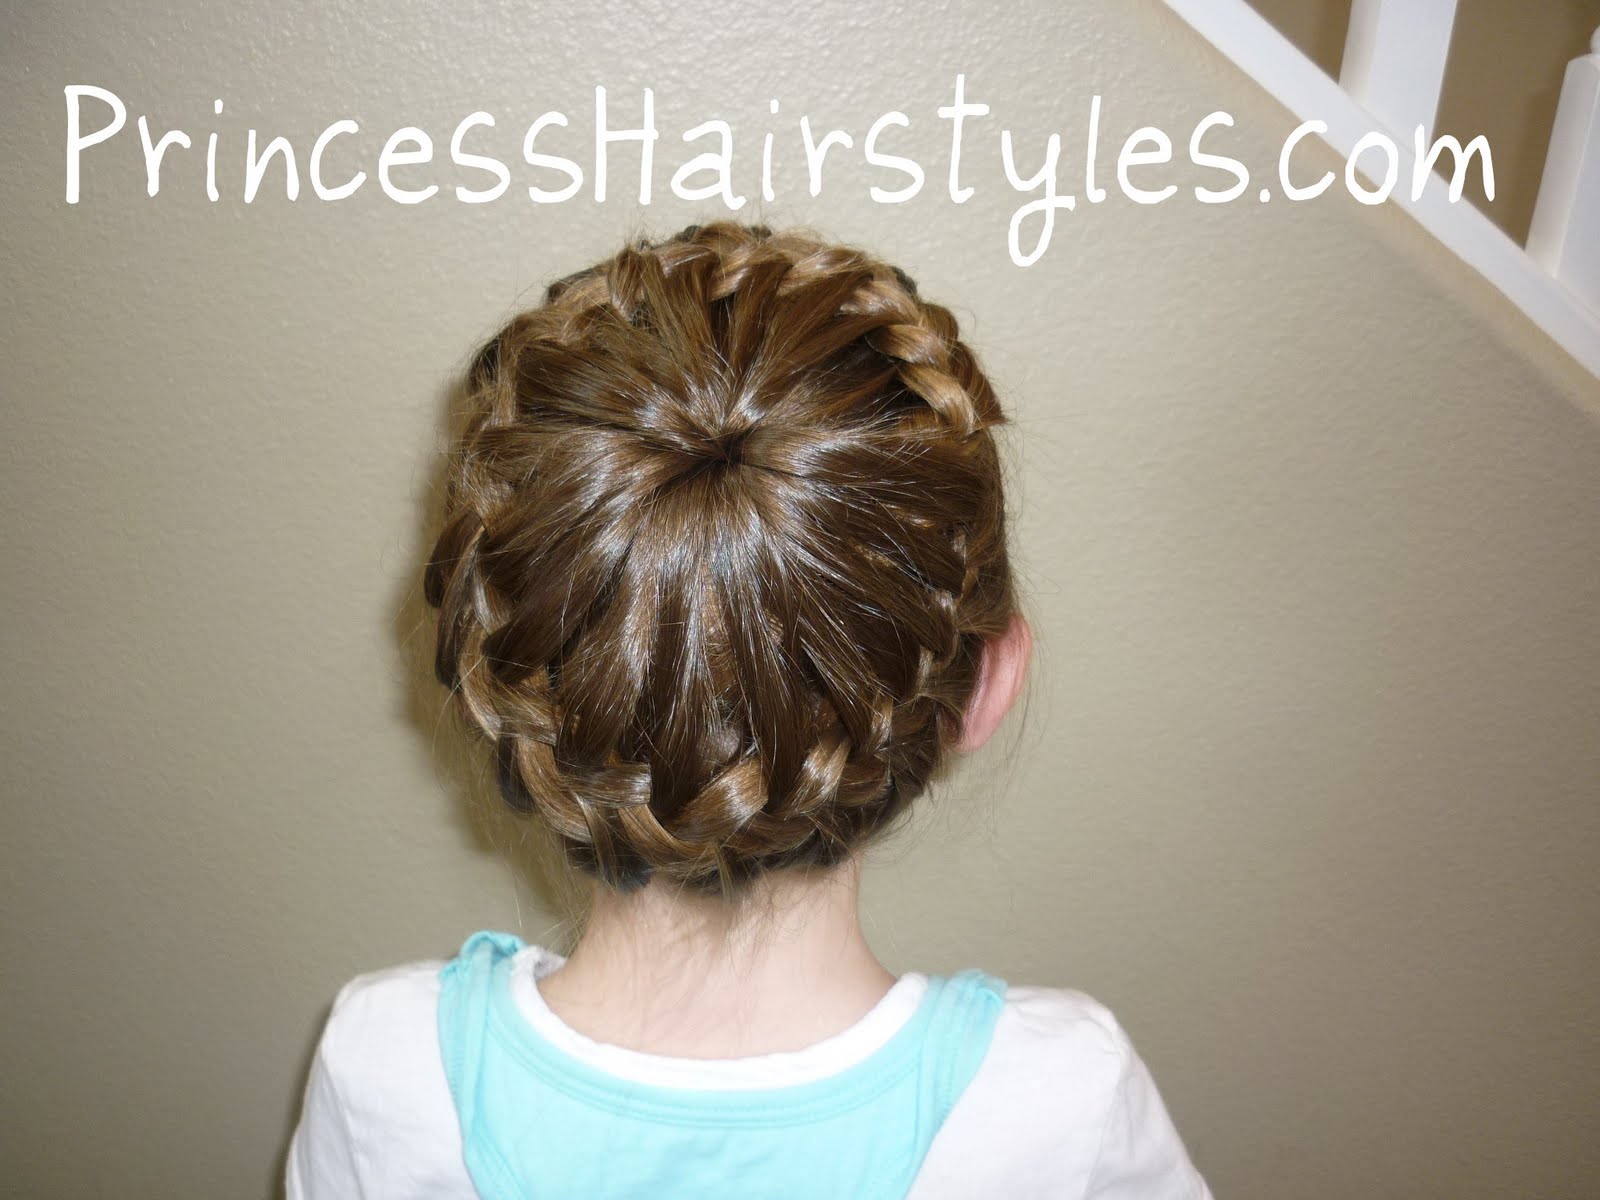 Or, you could double the braids up and make french braid pigtail buns! title=